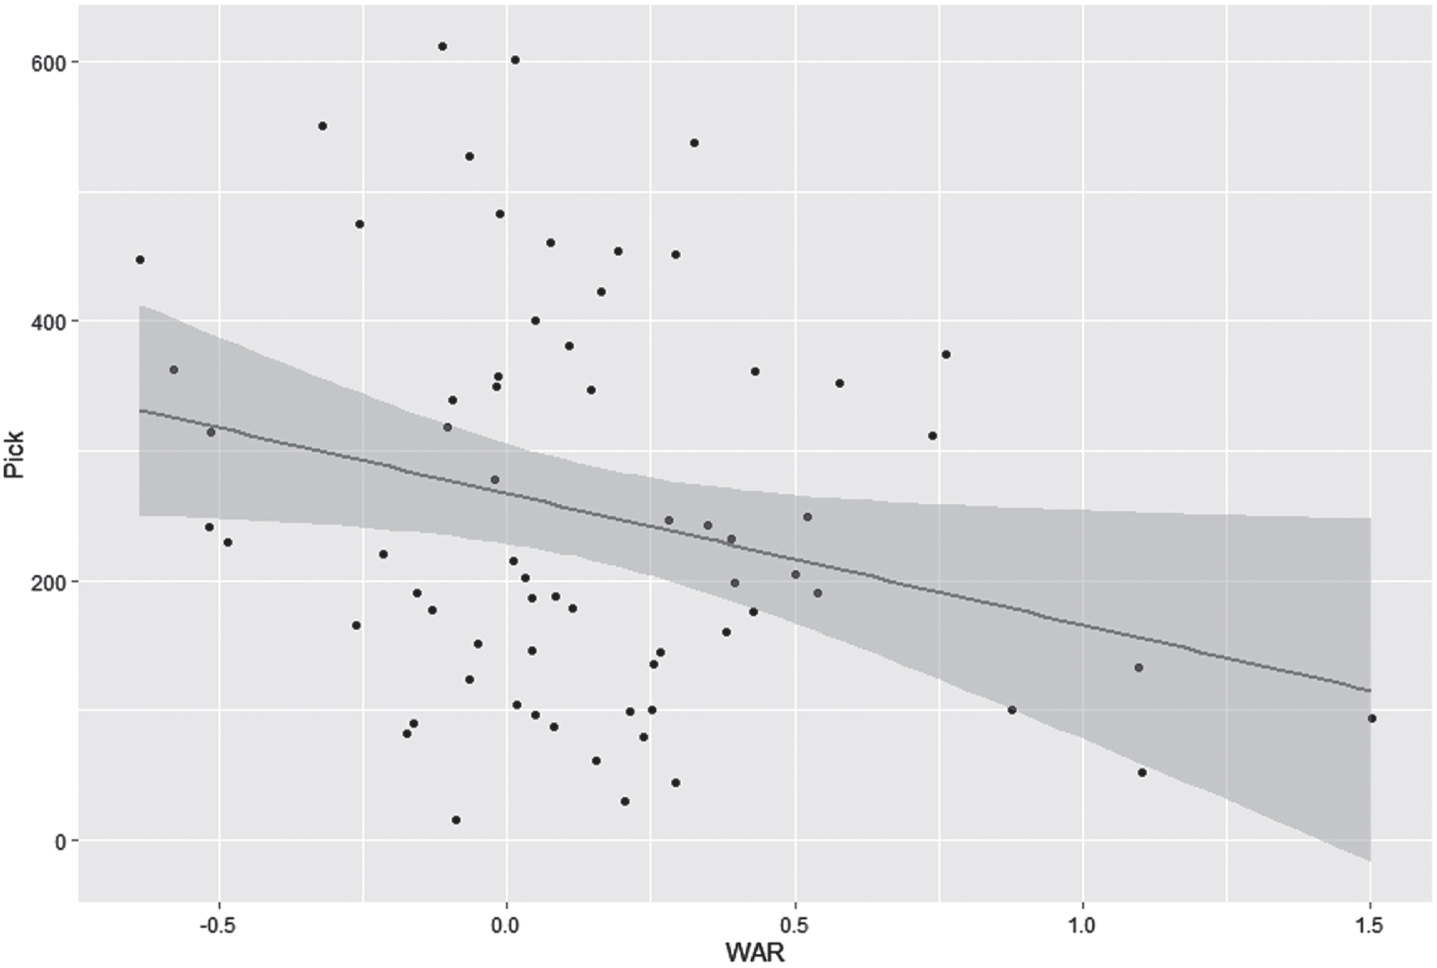 Scatterplot of draft position (2022) versus WAR (2021) for pitchers drafted from the Cape Cod Baseball League, with least-squares regression line and 95% confidence bands. Compared to the plot for batters, more pitchers have a WAR near 0, resulting in a weaker correlation.